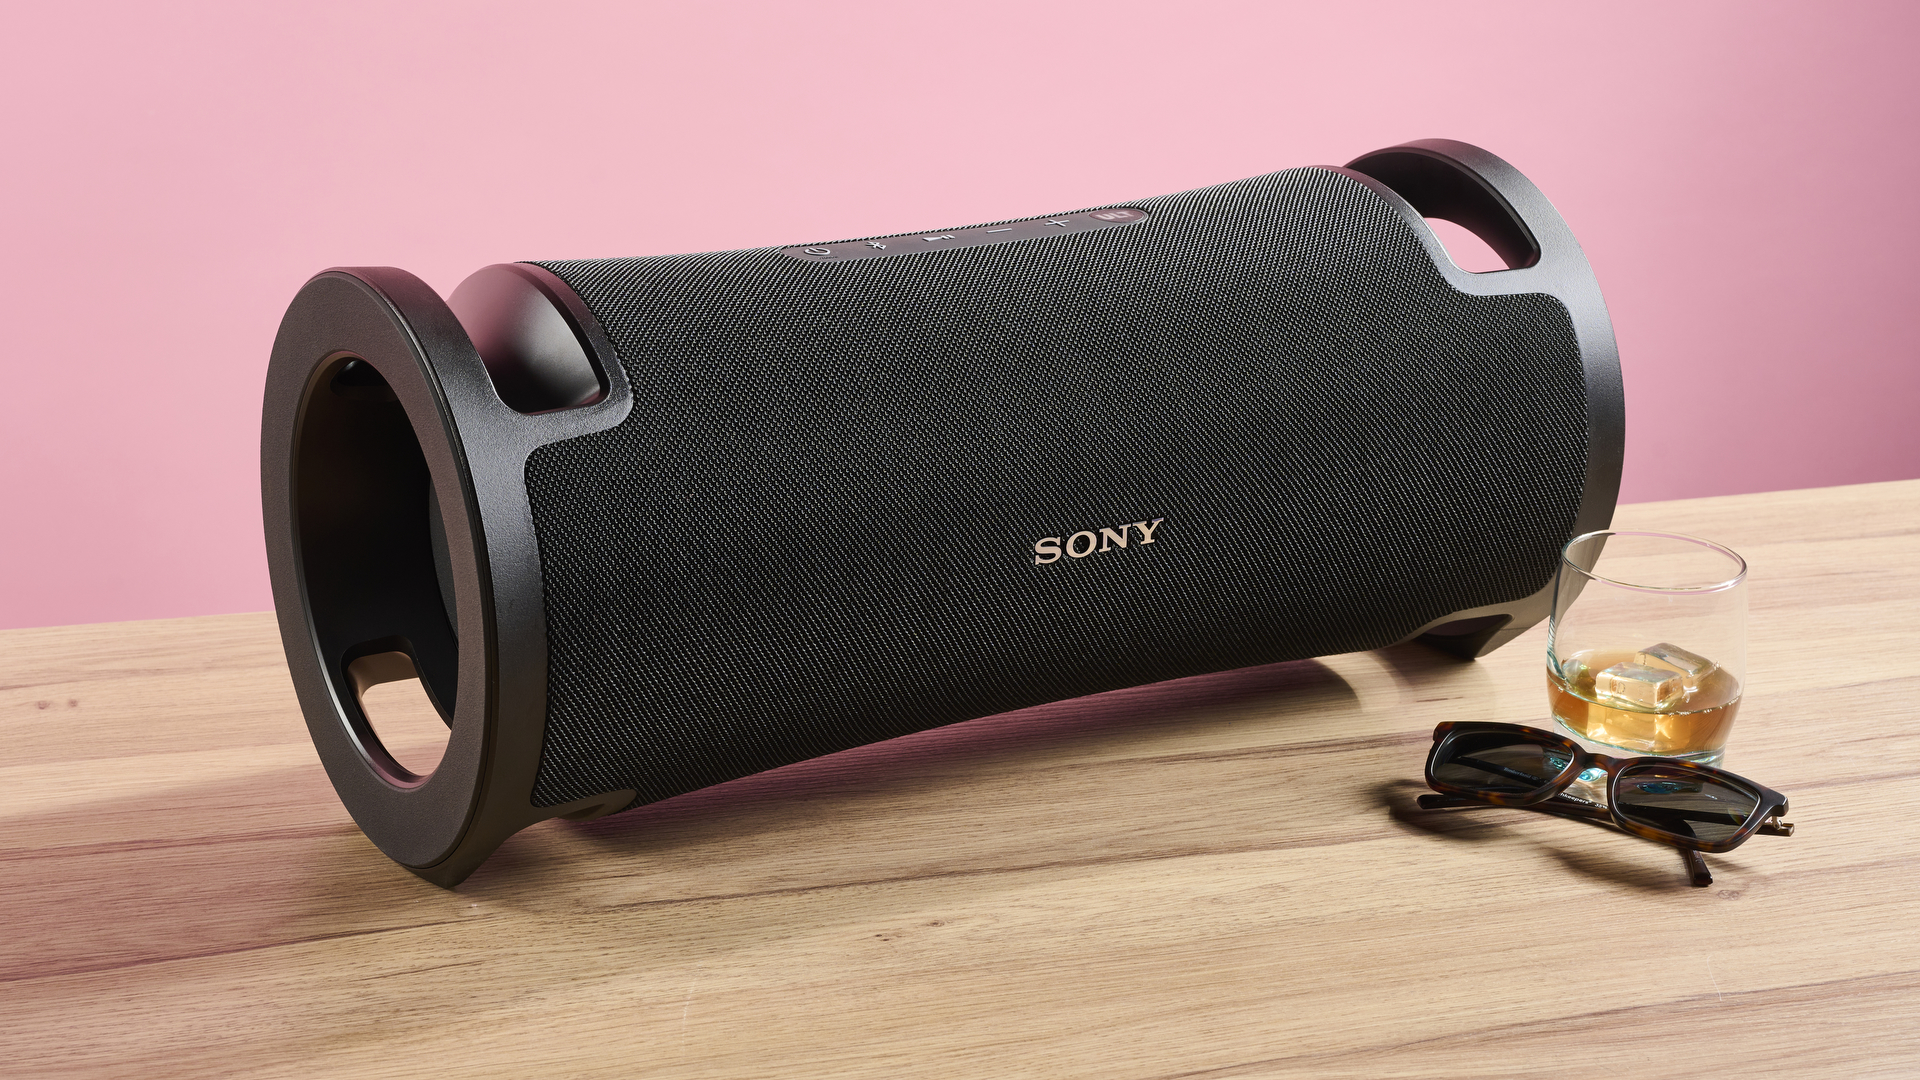 Sony ULT Field 7 review: a great wireless party speaker that can handle its big bass